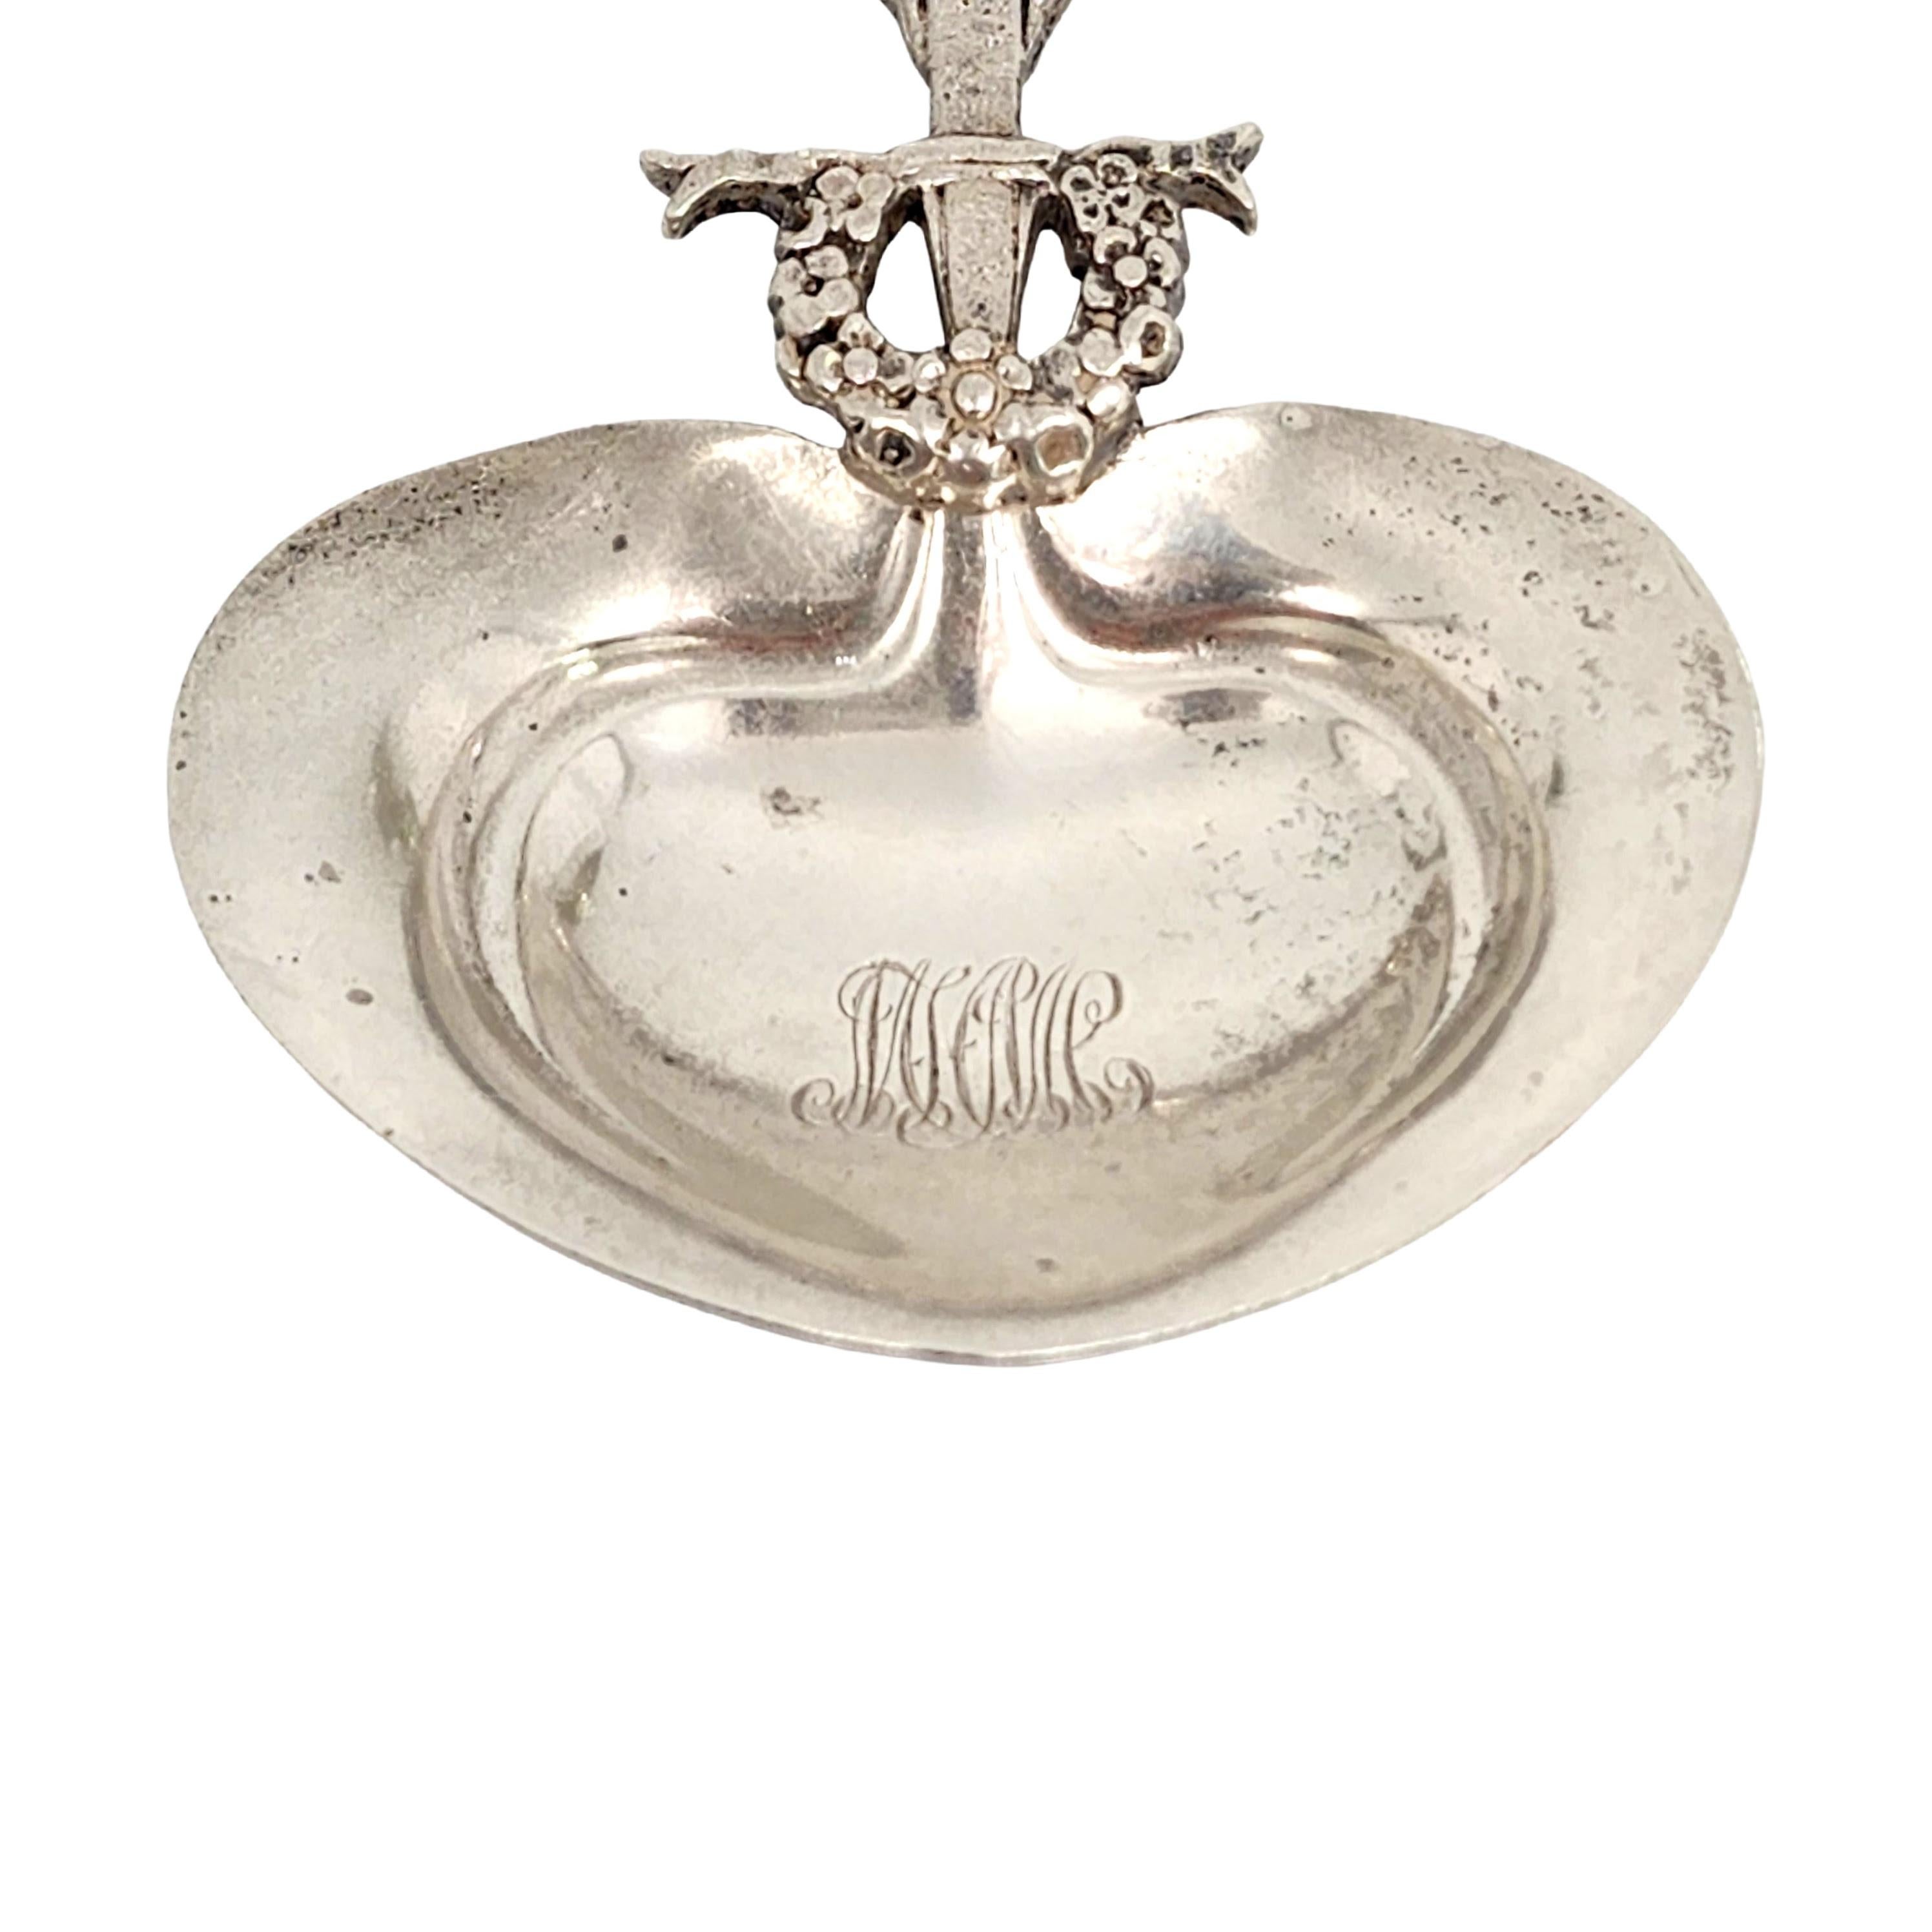 Tiffany & Co Torch and Wreath Sterling Silver Bon Bon Spoon with Monogram For Sale 1